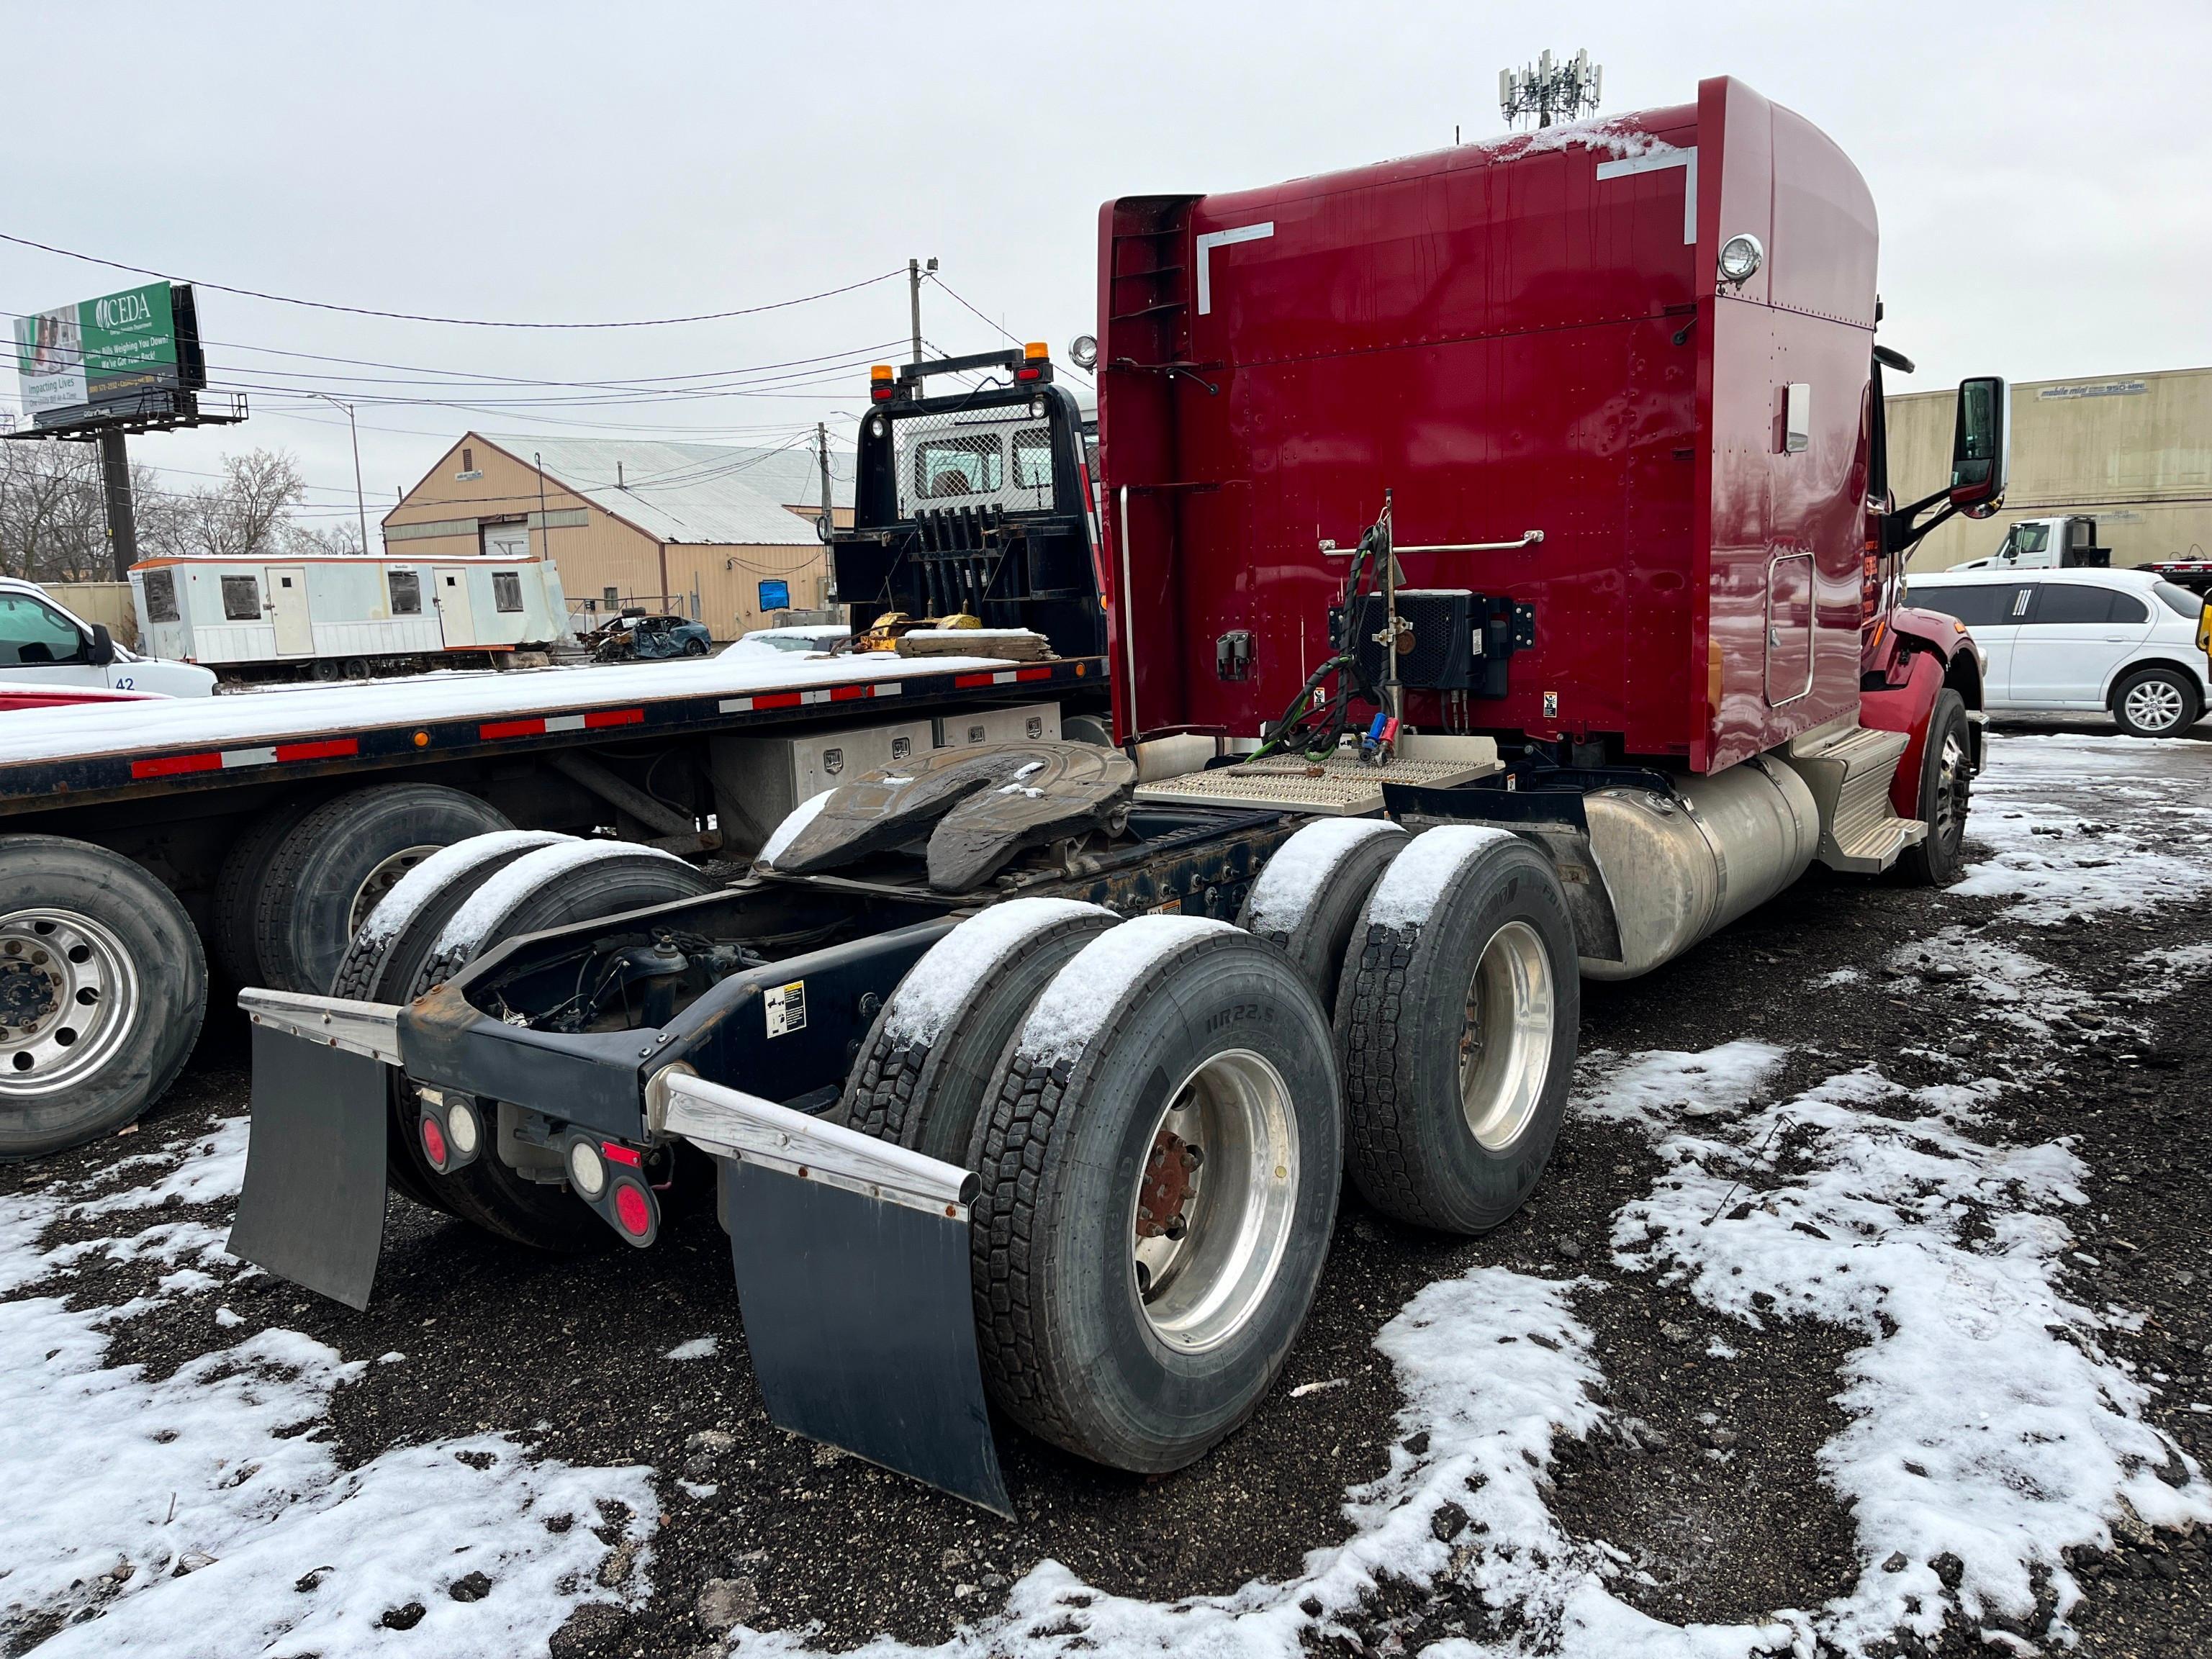 2019 PETERBILT 567 TRUCK TRACTOR VN:1XPCDP9X8KD625959 powered by Paccar MX-13 diesel engine, 500hp,